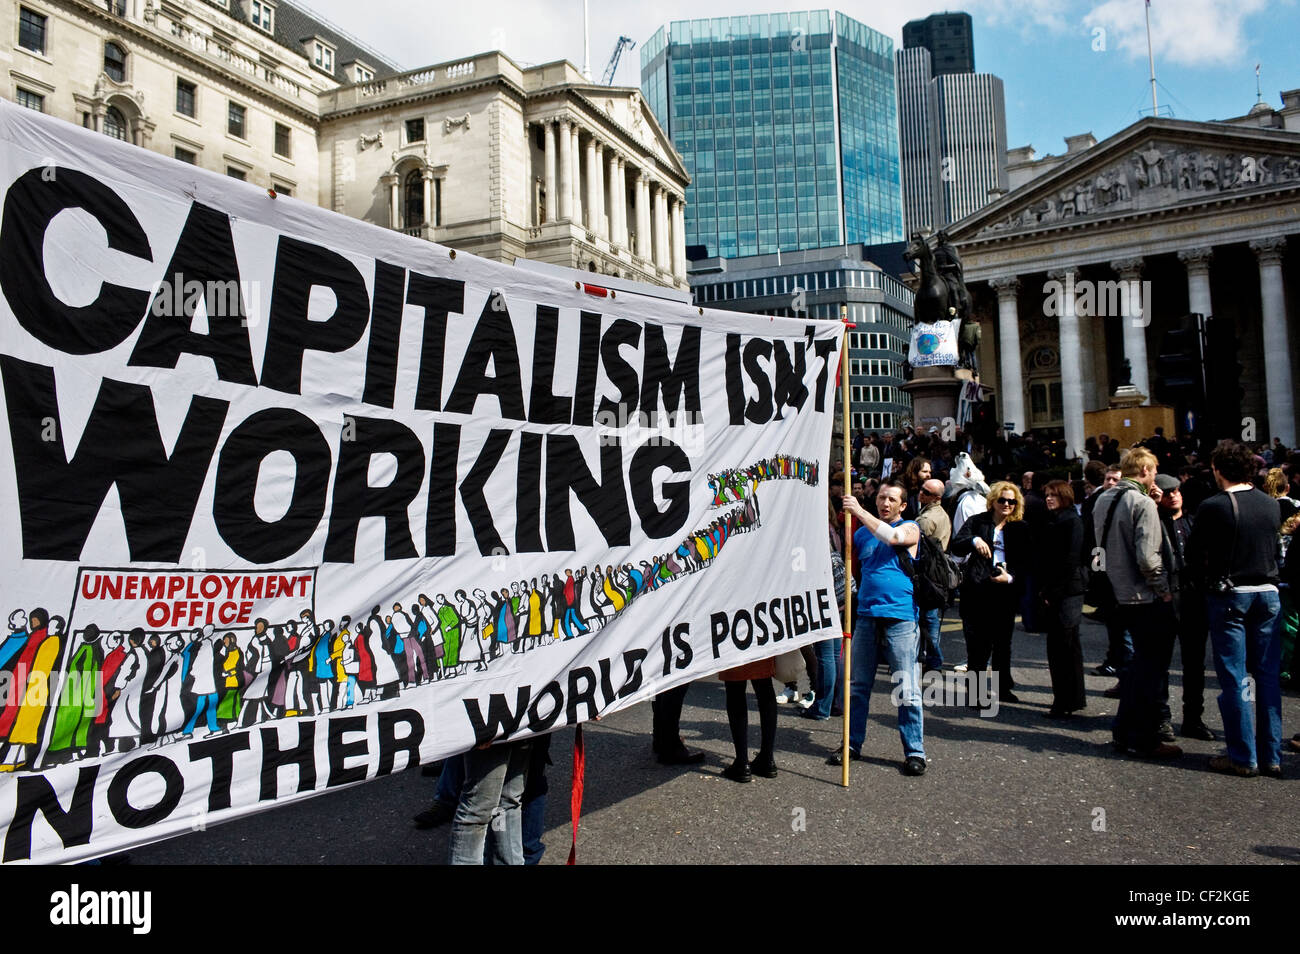 Protestors holding a large banner stating 'Capitalism Isn't Working' at the G20 demonstration in the City of London. Stock Photo